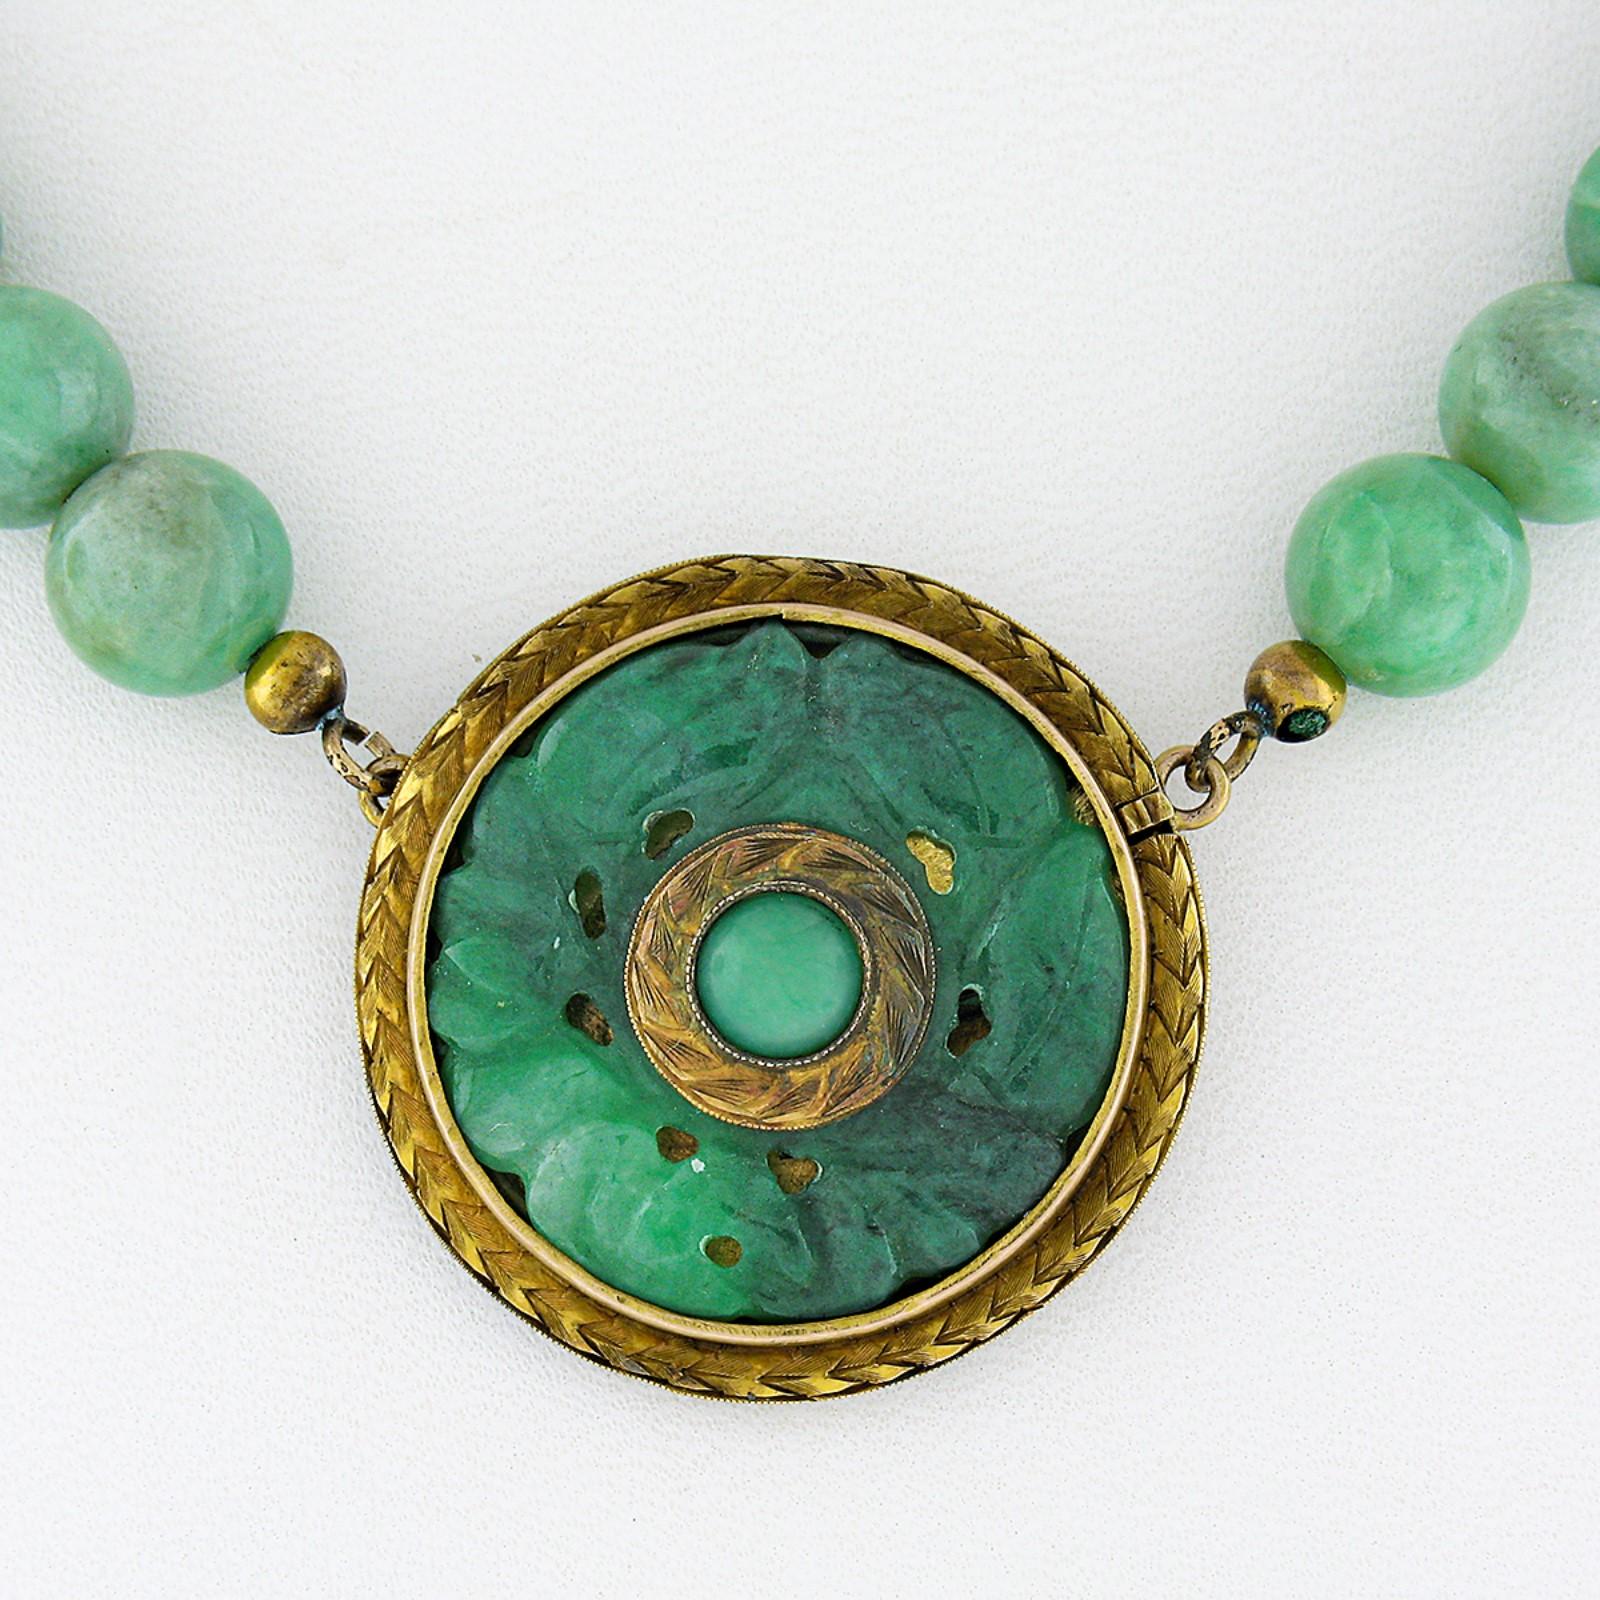 Here we have an absolutely gorgeous antique green Jade bead strand necklace that features an incredible carved Jade pendant set in solid 14k yellow gold. The Jade on this pendant has been masterfully carved into a lovely flower design, showing